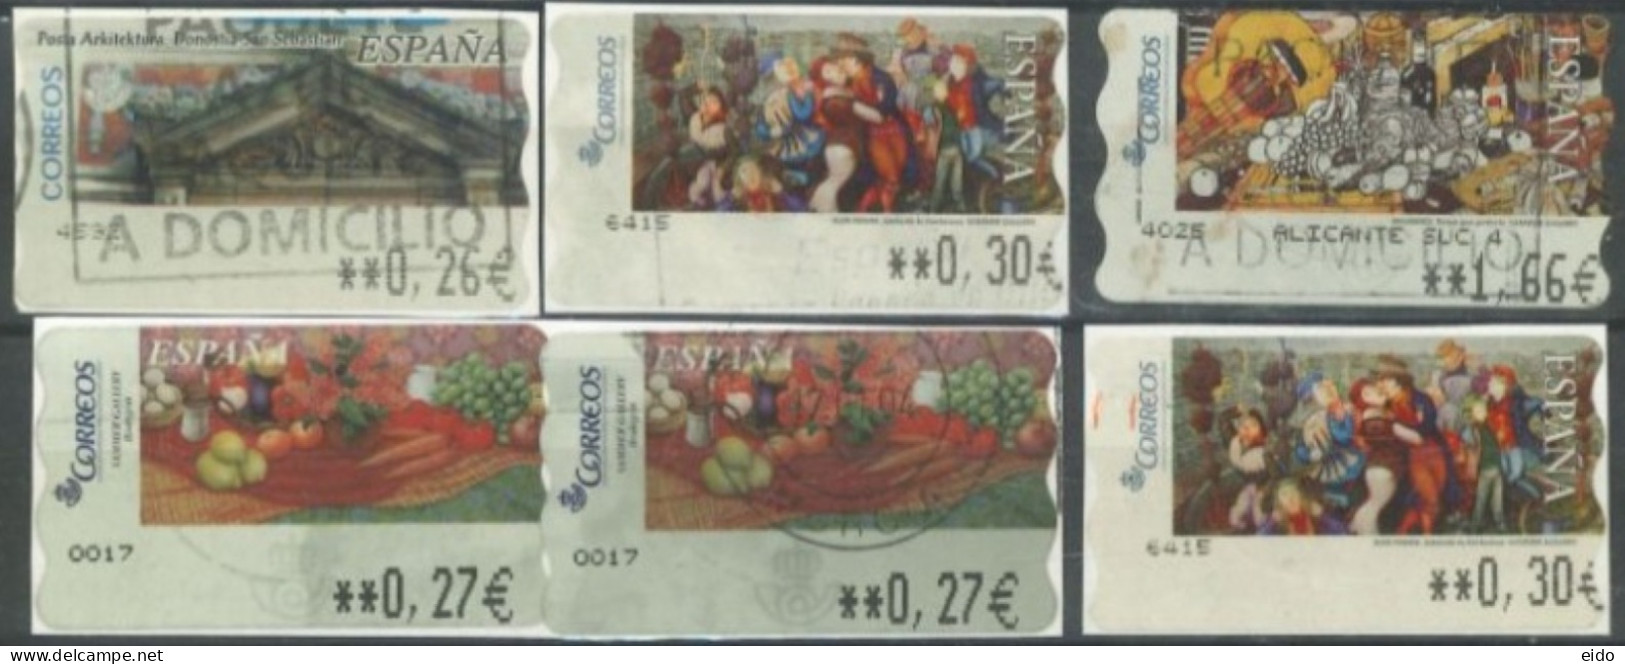 SPAIN- 2003/04,SAN SABASTIAN ARCH. AND SAMMER GALLERY STAMPS LABELS SET OF 6, DIFFERENT VALUES, USED. - Usados